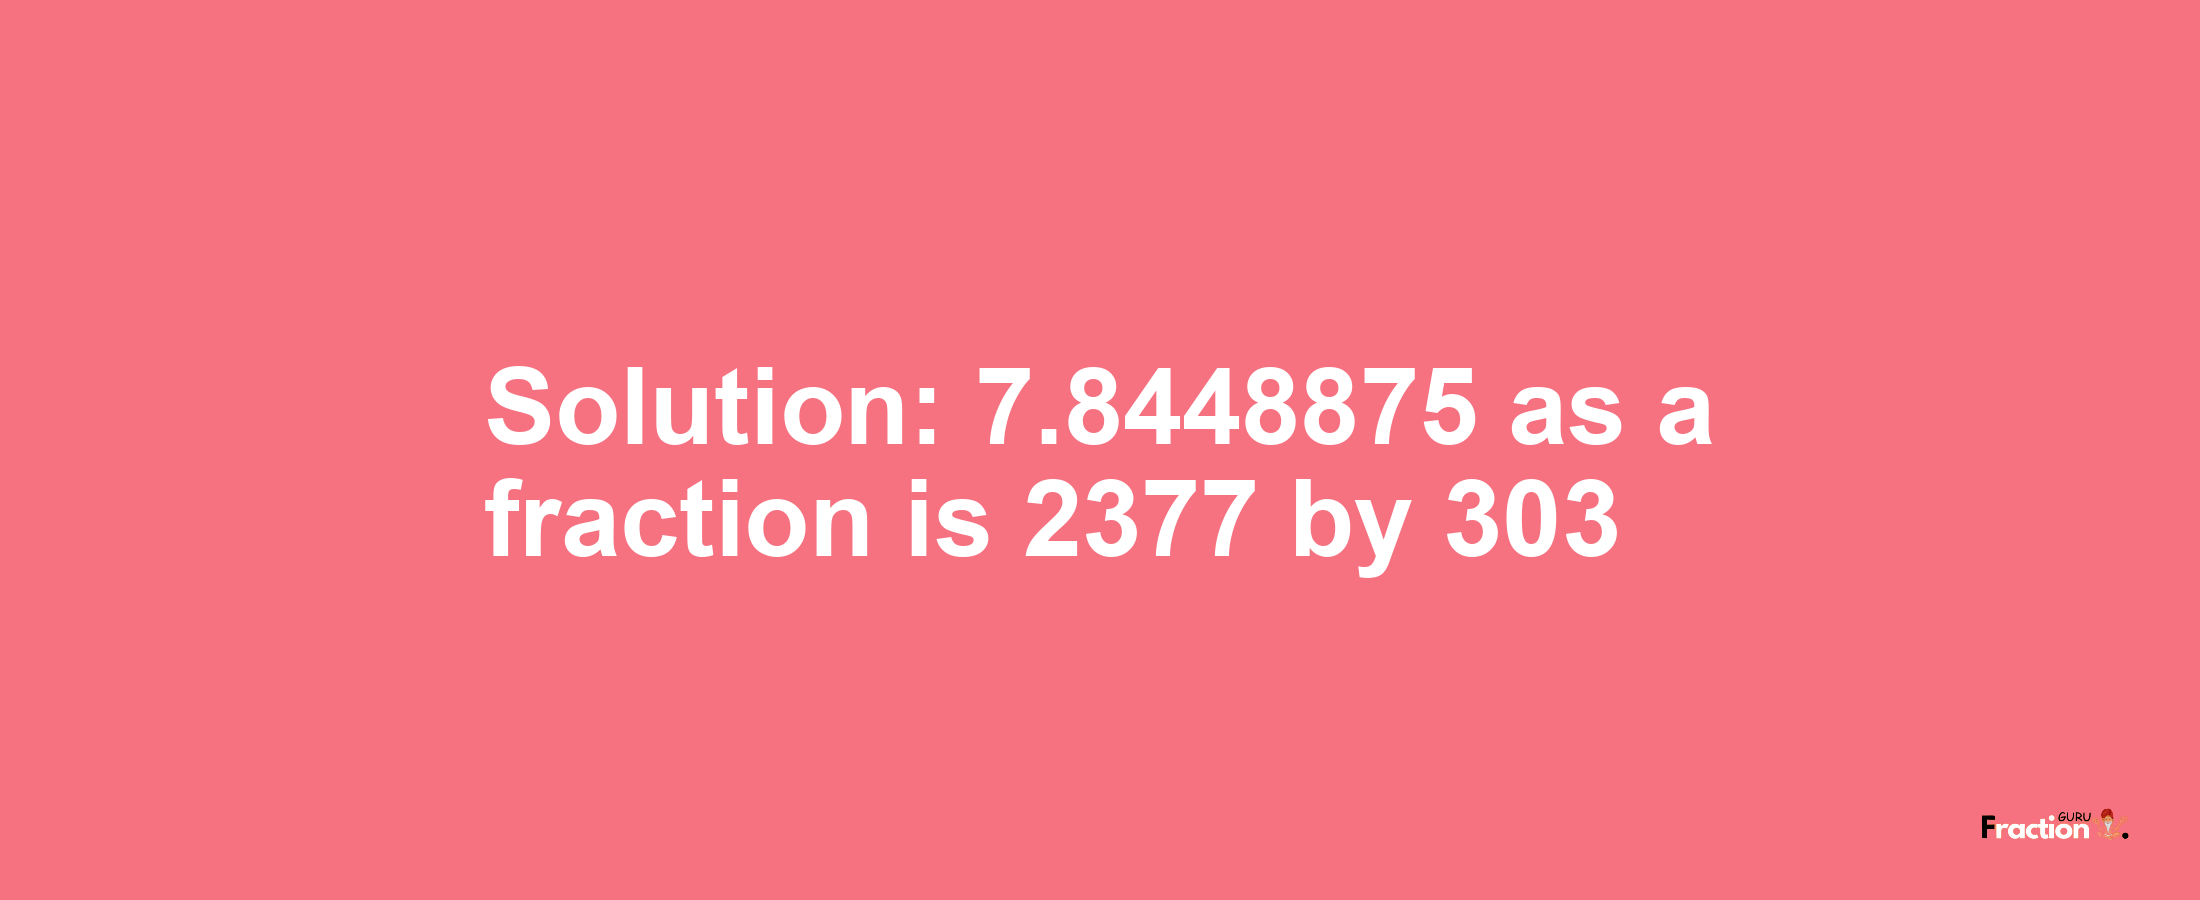 Solution:7.8448875 as a fraction is 2377/303